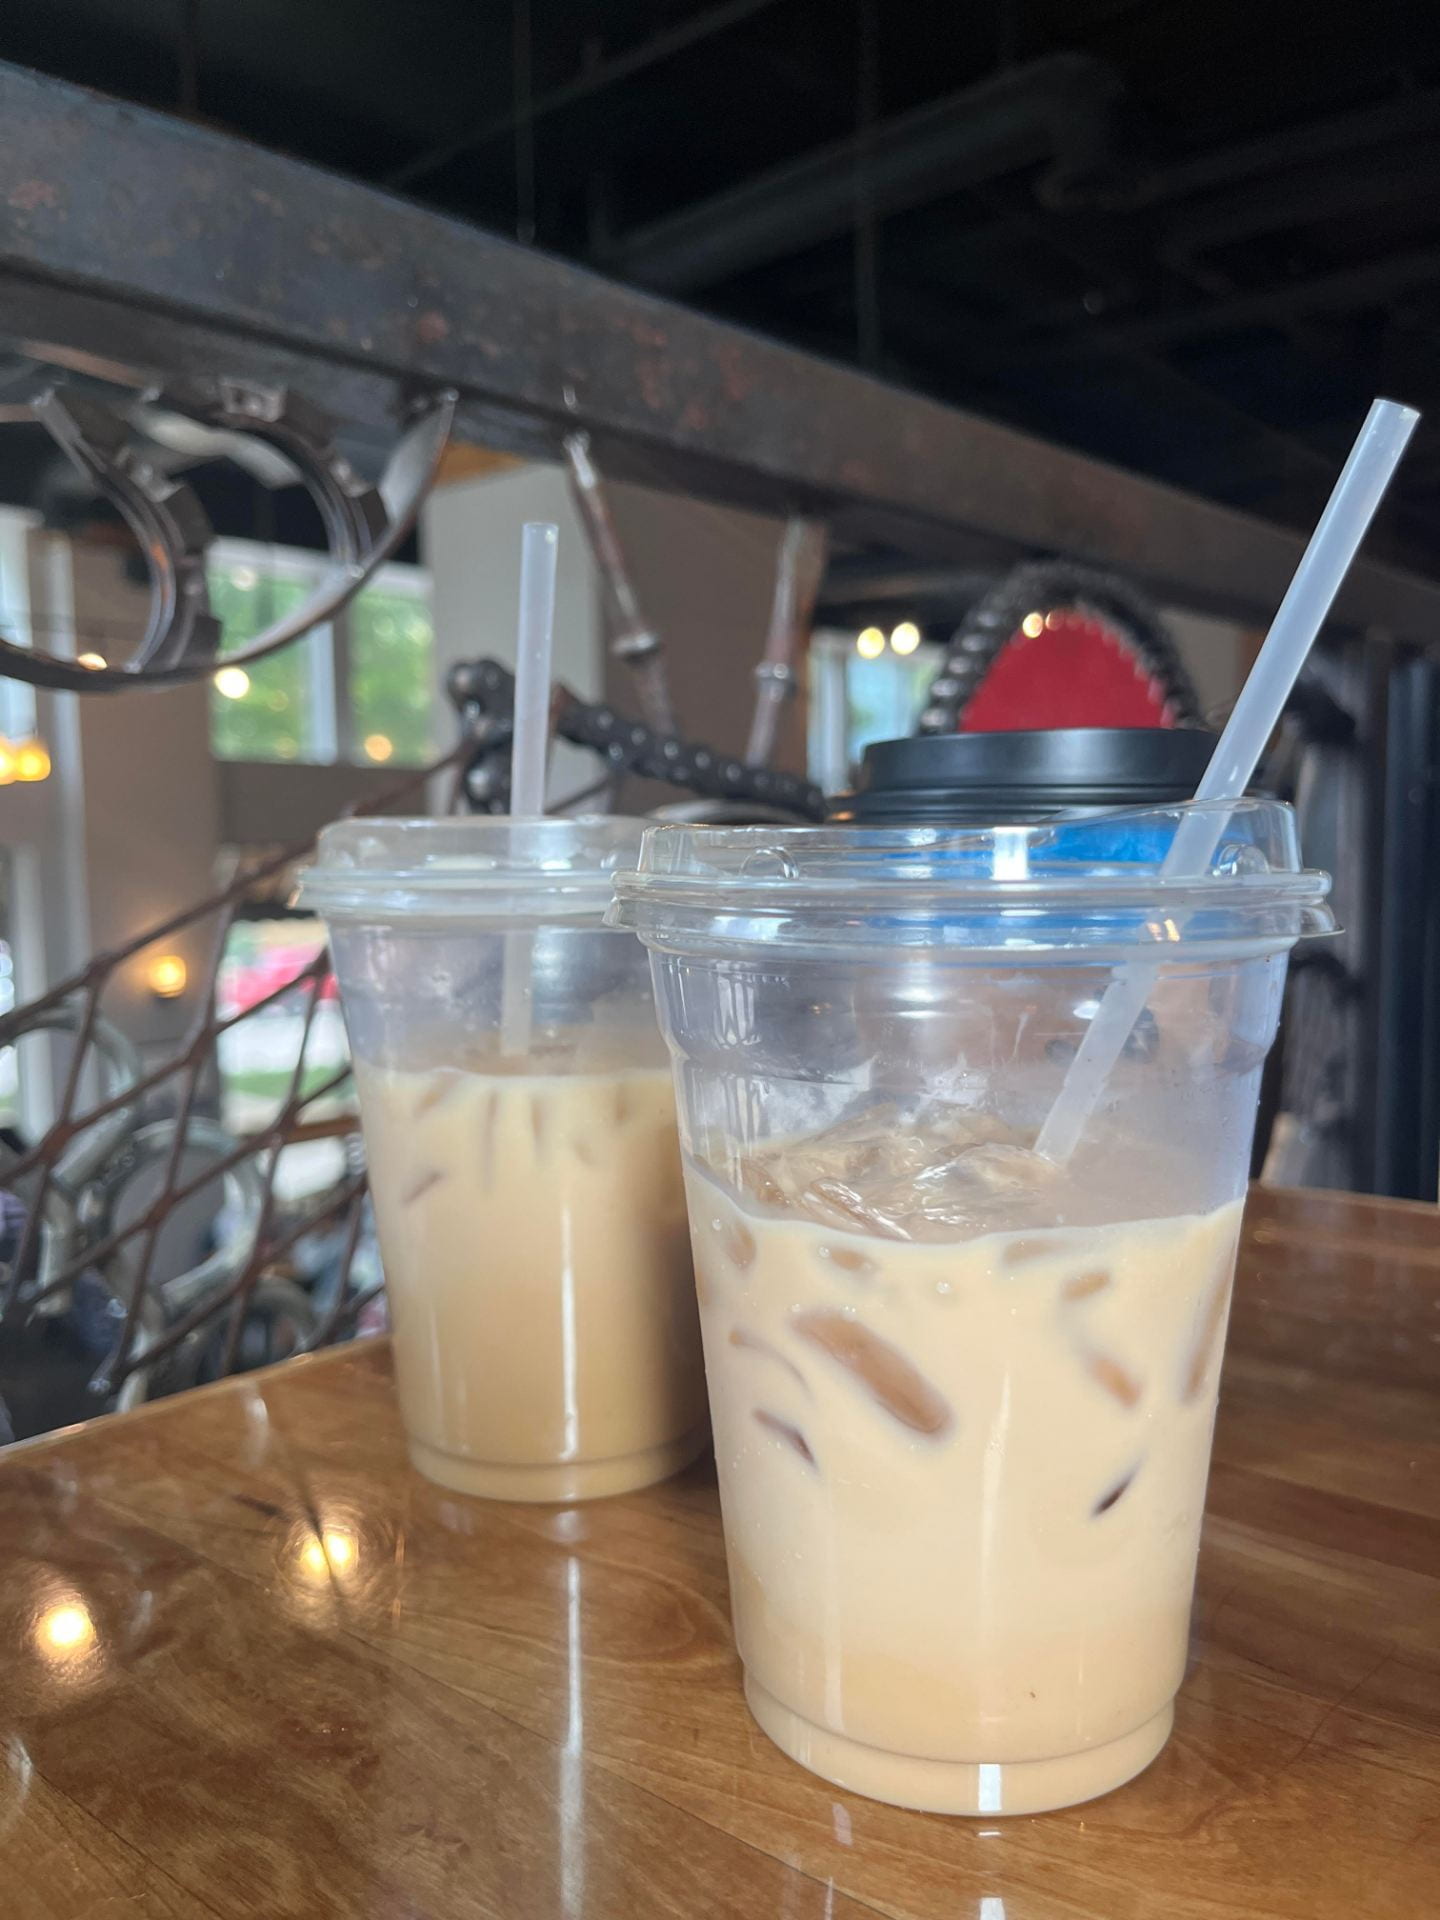 DePaul Student Enjoys iced coffee with friends during a weekend getaway to WI.